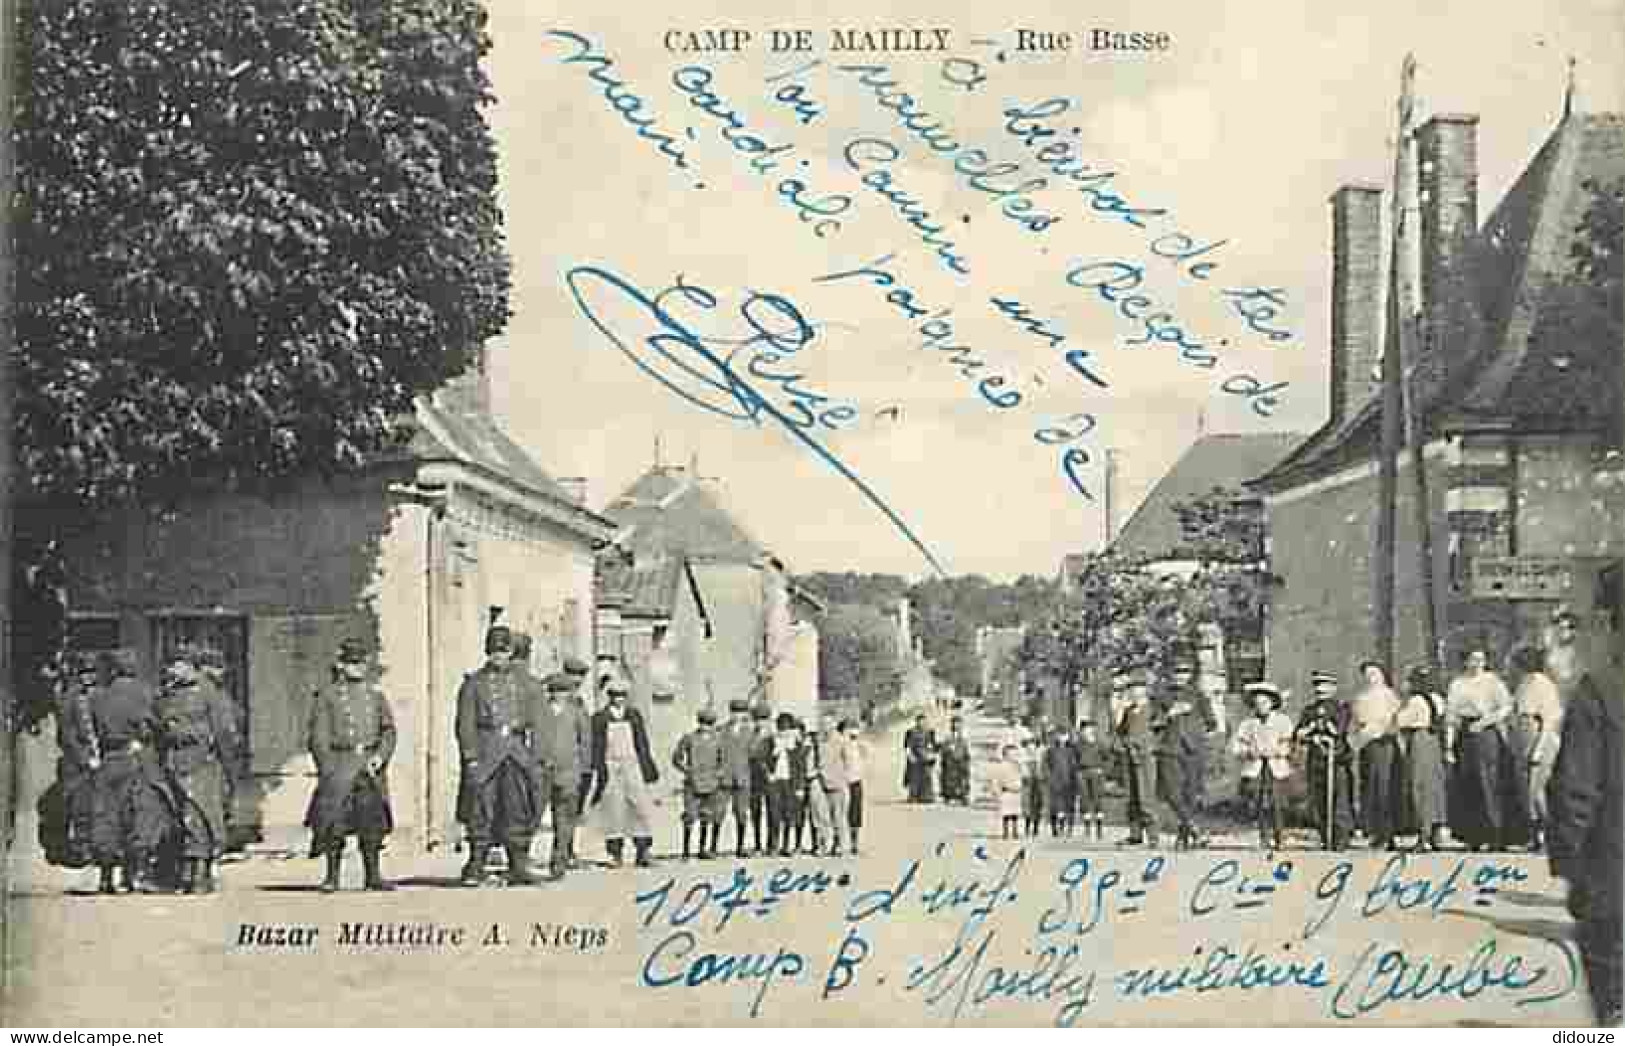 10 - Mailly Le Camp - Camp De Mailly - Rue Basse - Animée - Militaria - CPA - Voir Scans Recto-Verso - Mailly-le-Camp